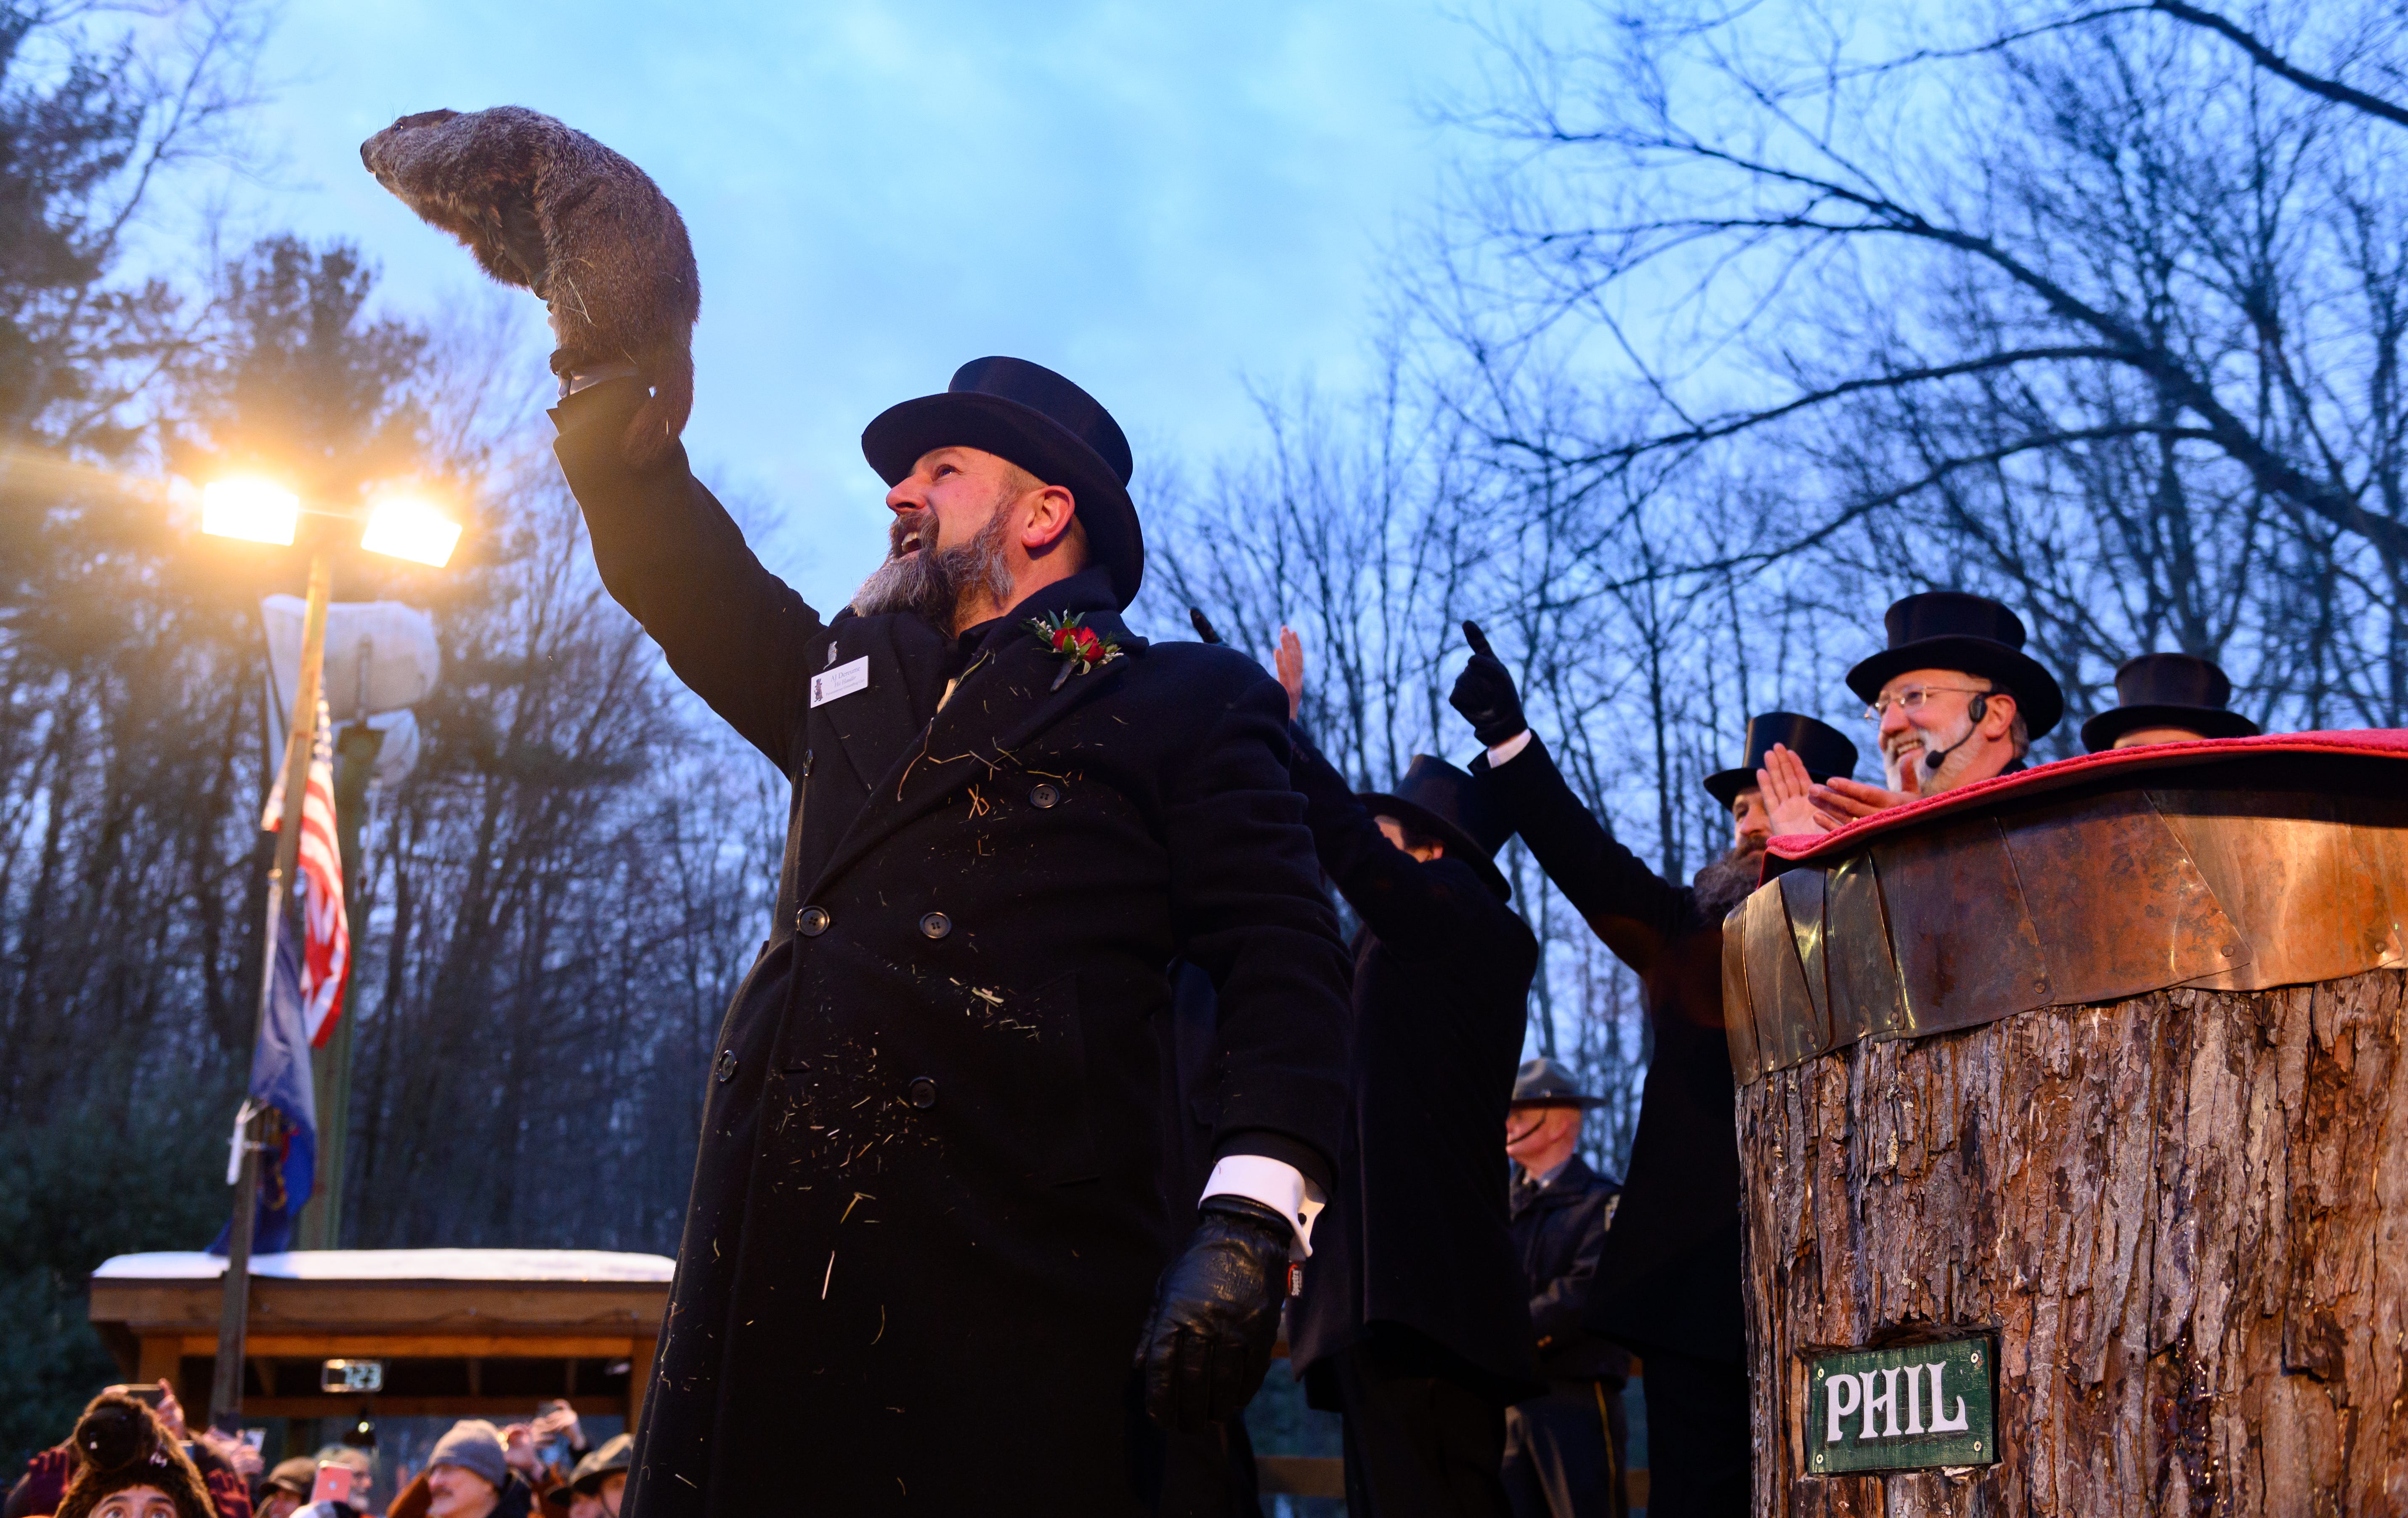 Did the groundhog see his shadow? Get the results of Punxsutawney Phil's winter forecast